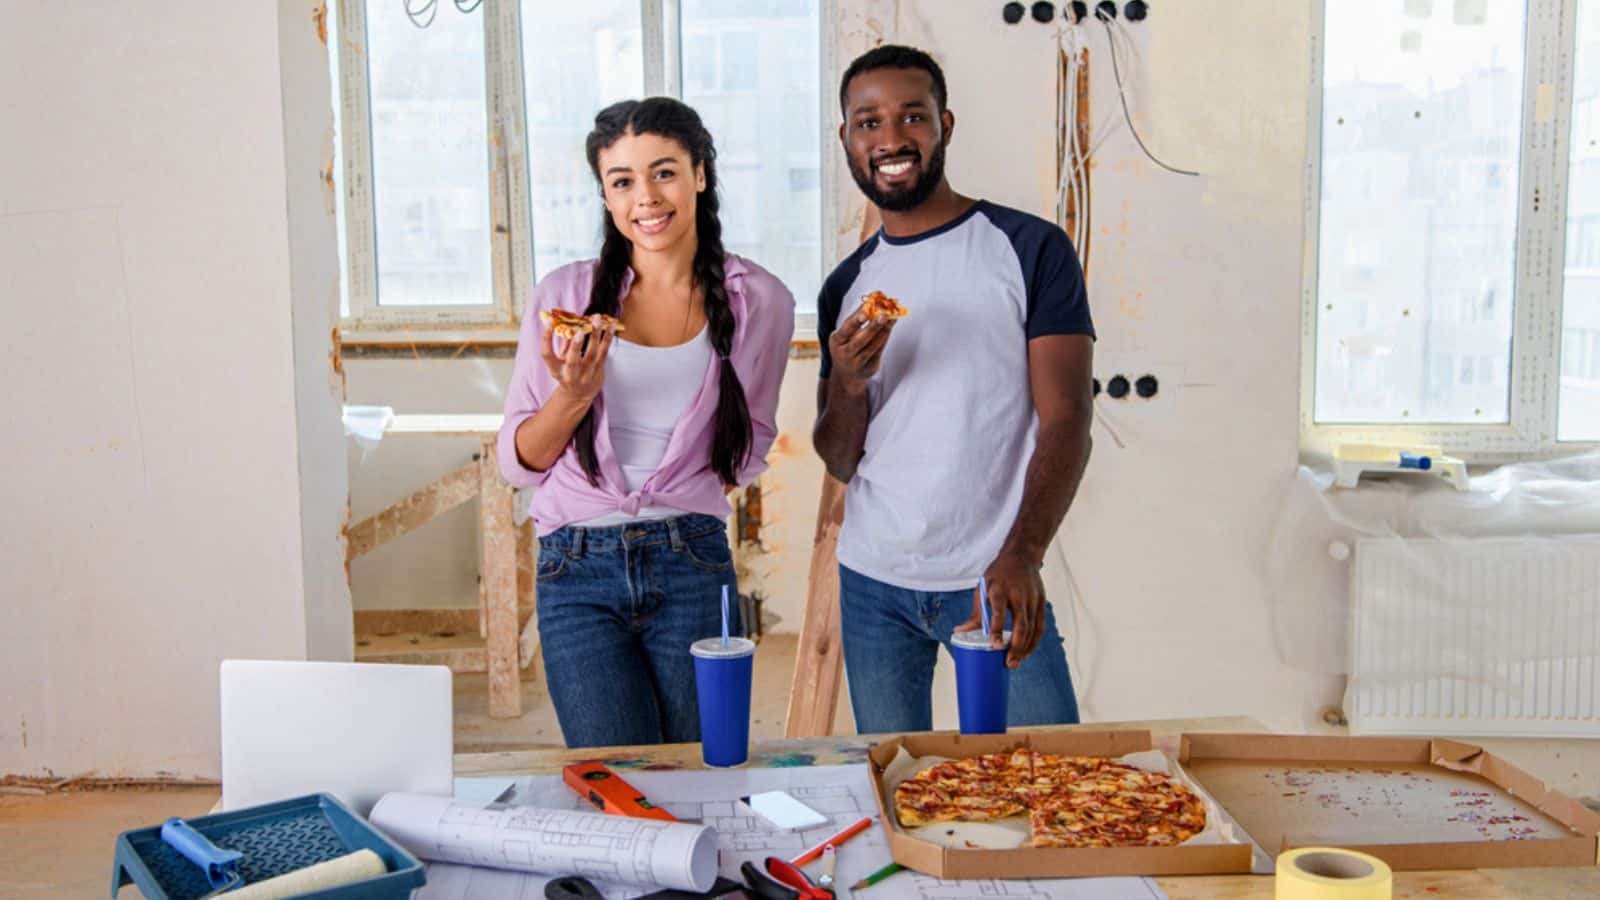 Smiling young couple eating pizza while making renovation of home